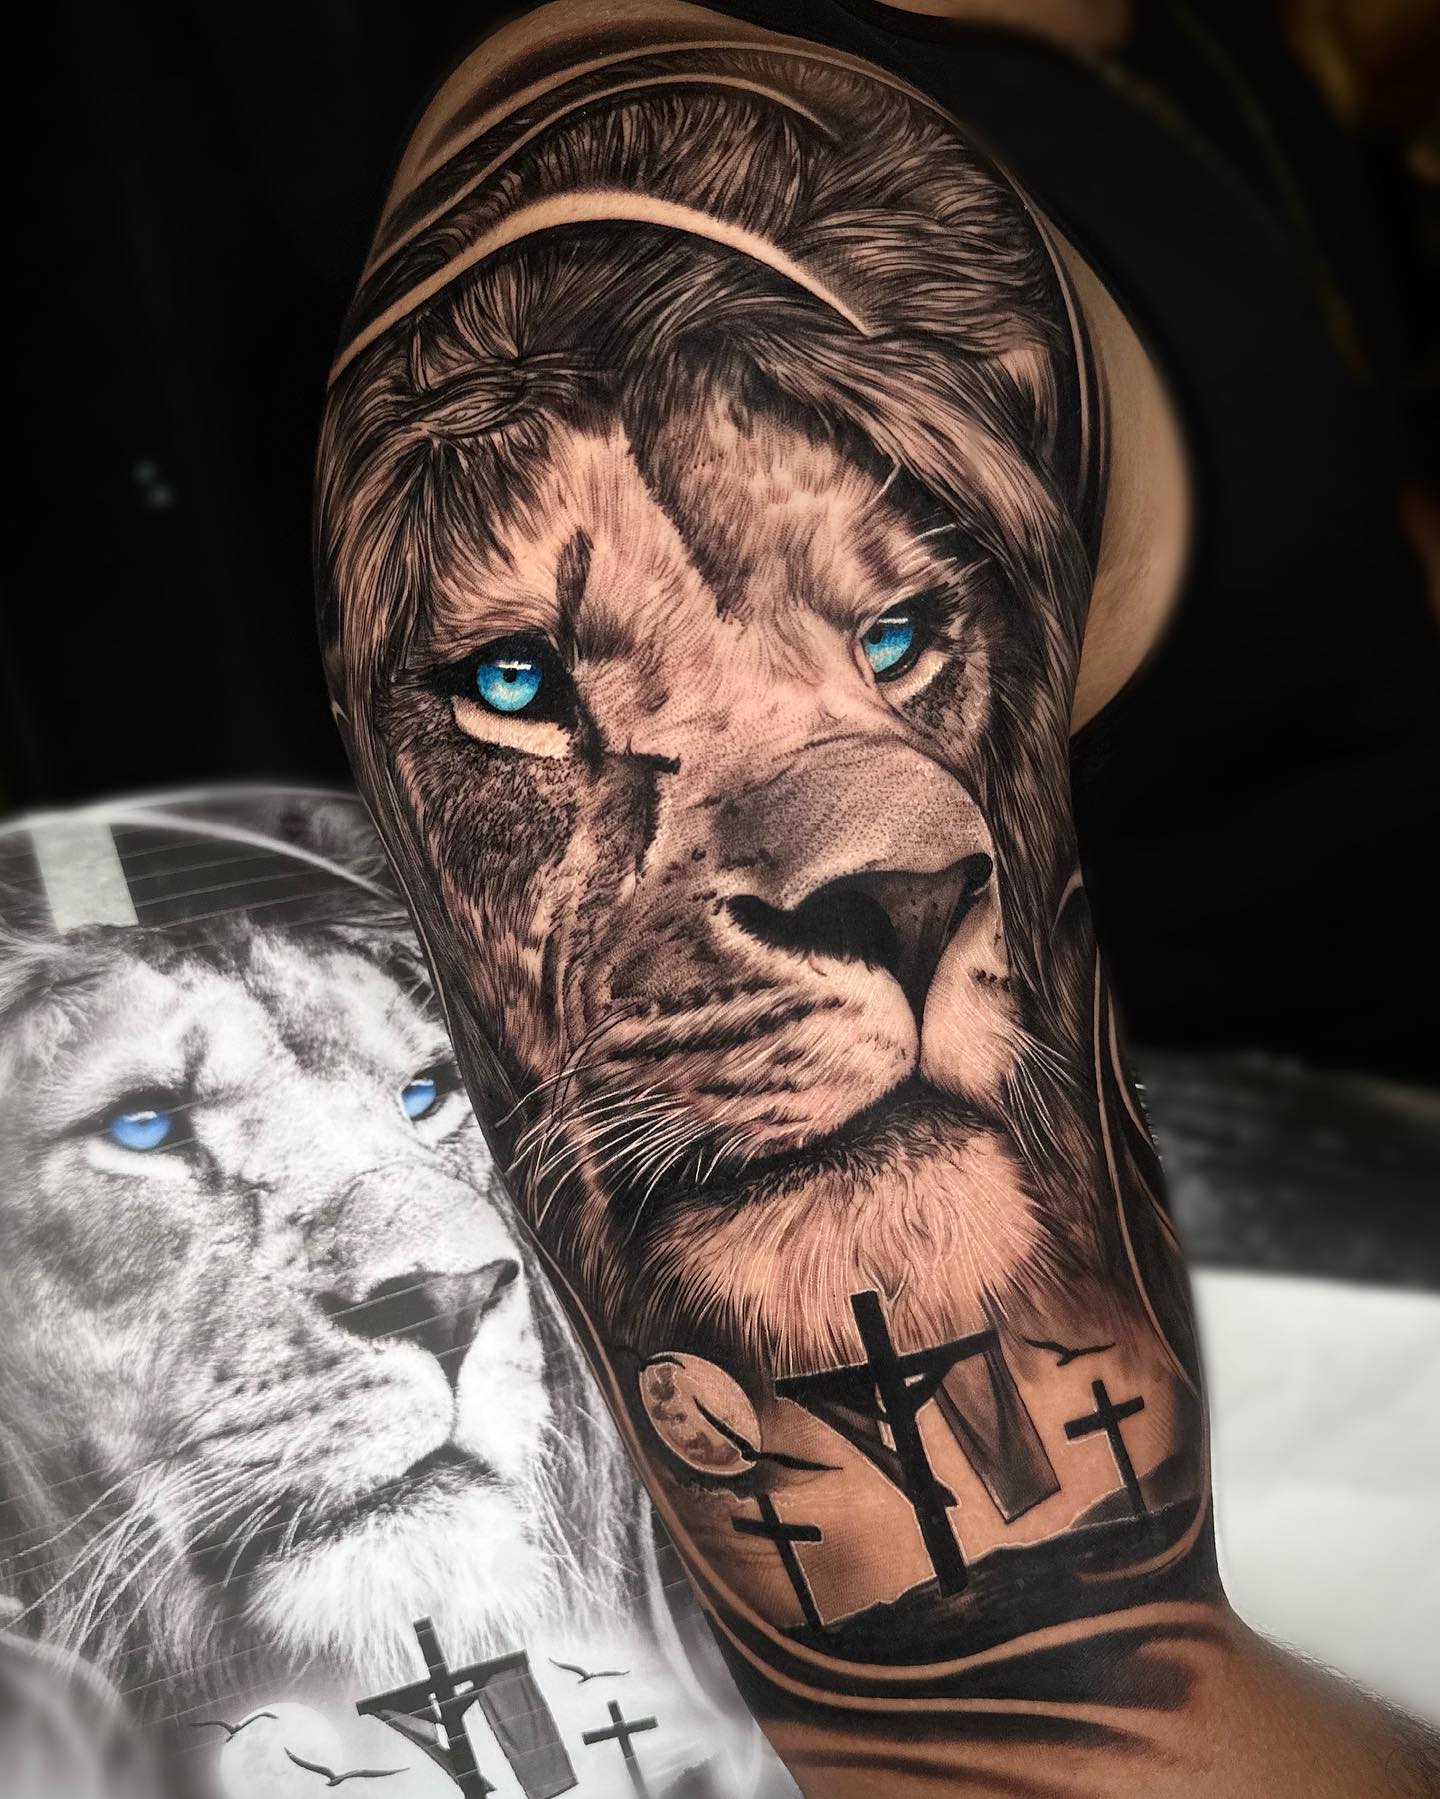 Finished up this cool lion calf tattoo. Thanks again Nick! . . . .  @worldfamousink @bishoprotary @criticaltattoosupply @blackclaw… | Instagram